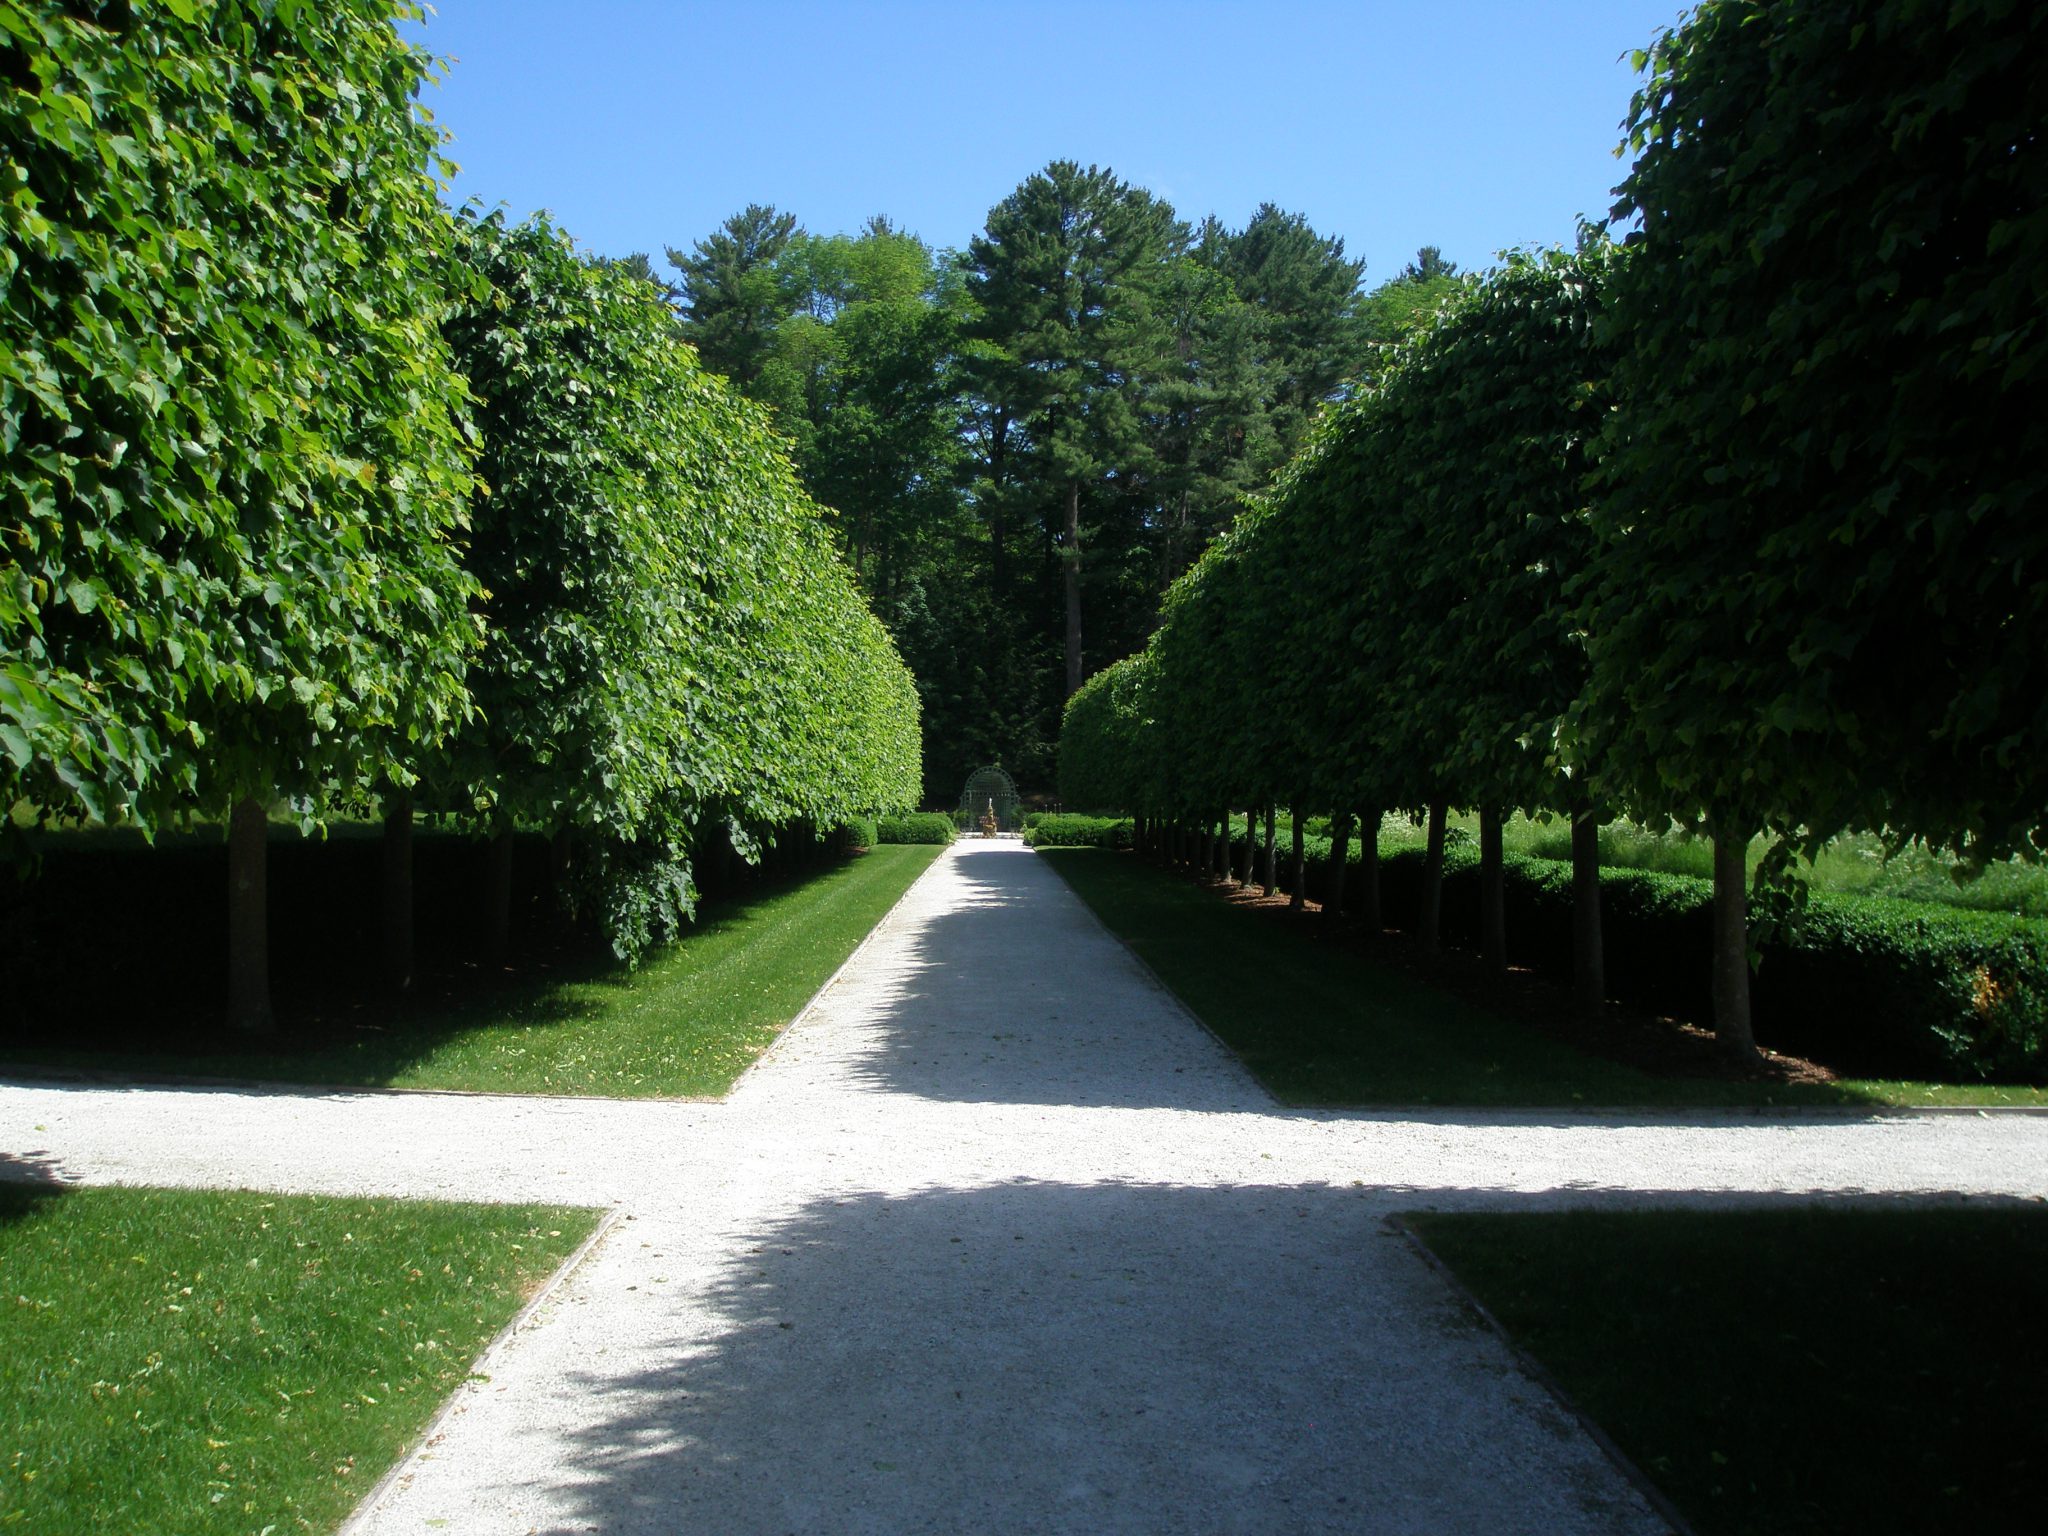 The Lime Walk, so-named for its Linden Trees. In England, Linden Trees are known a Lime Trees.